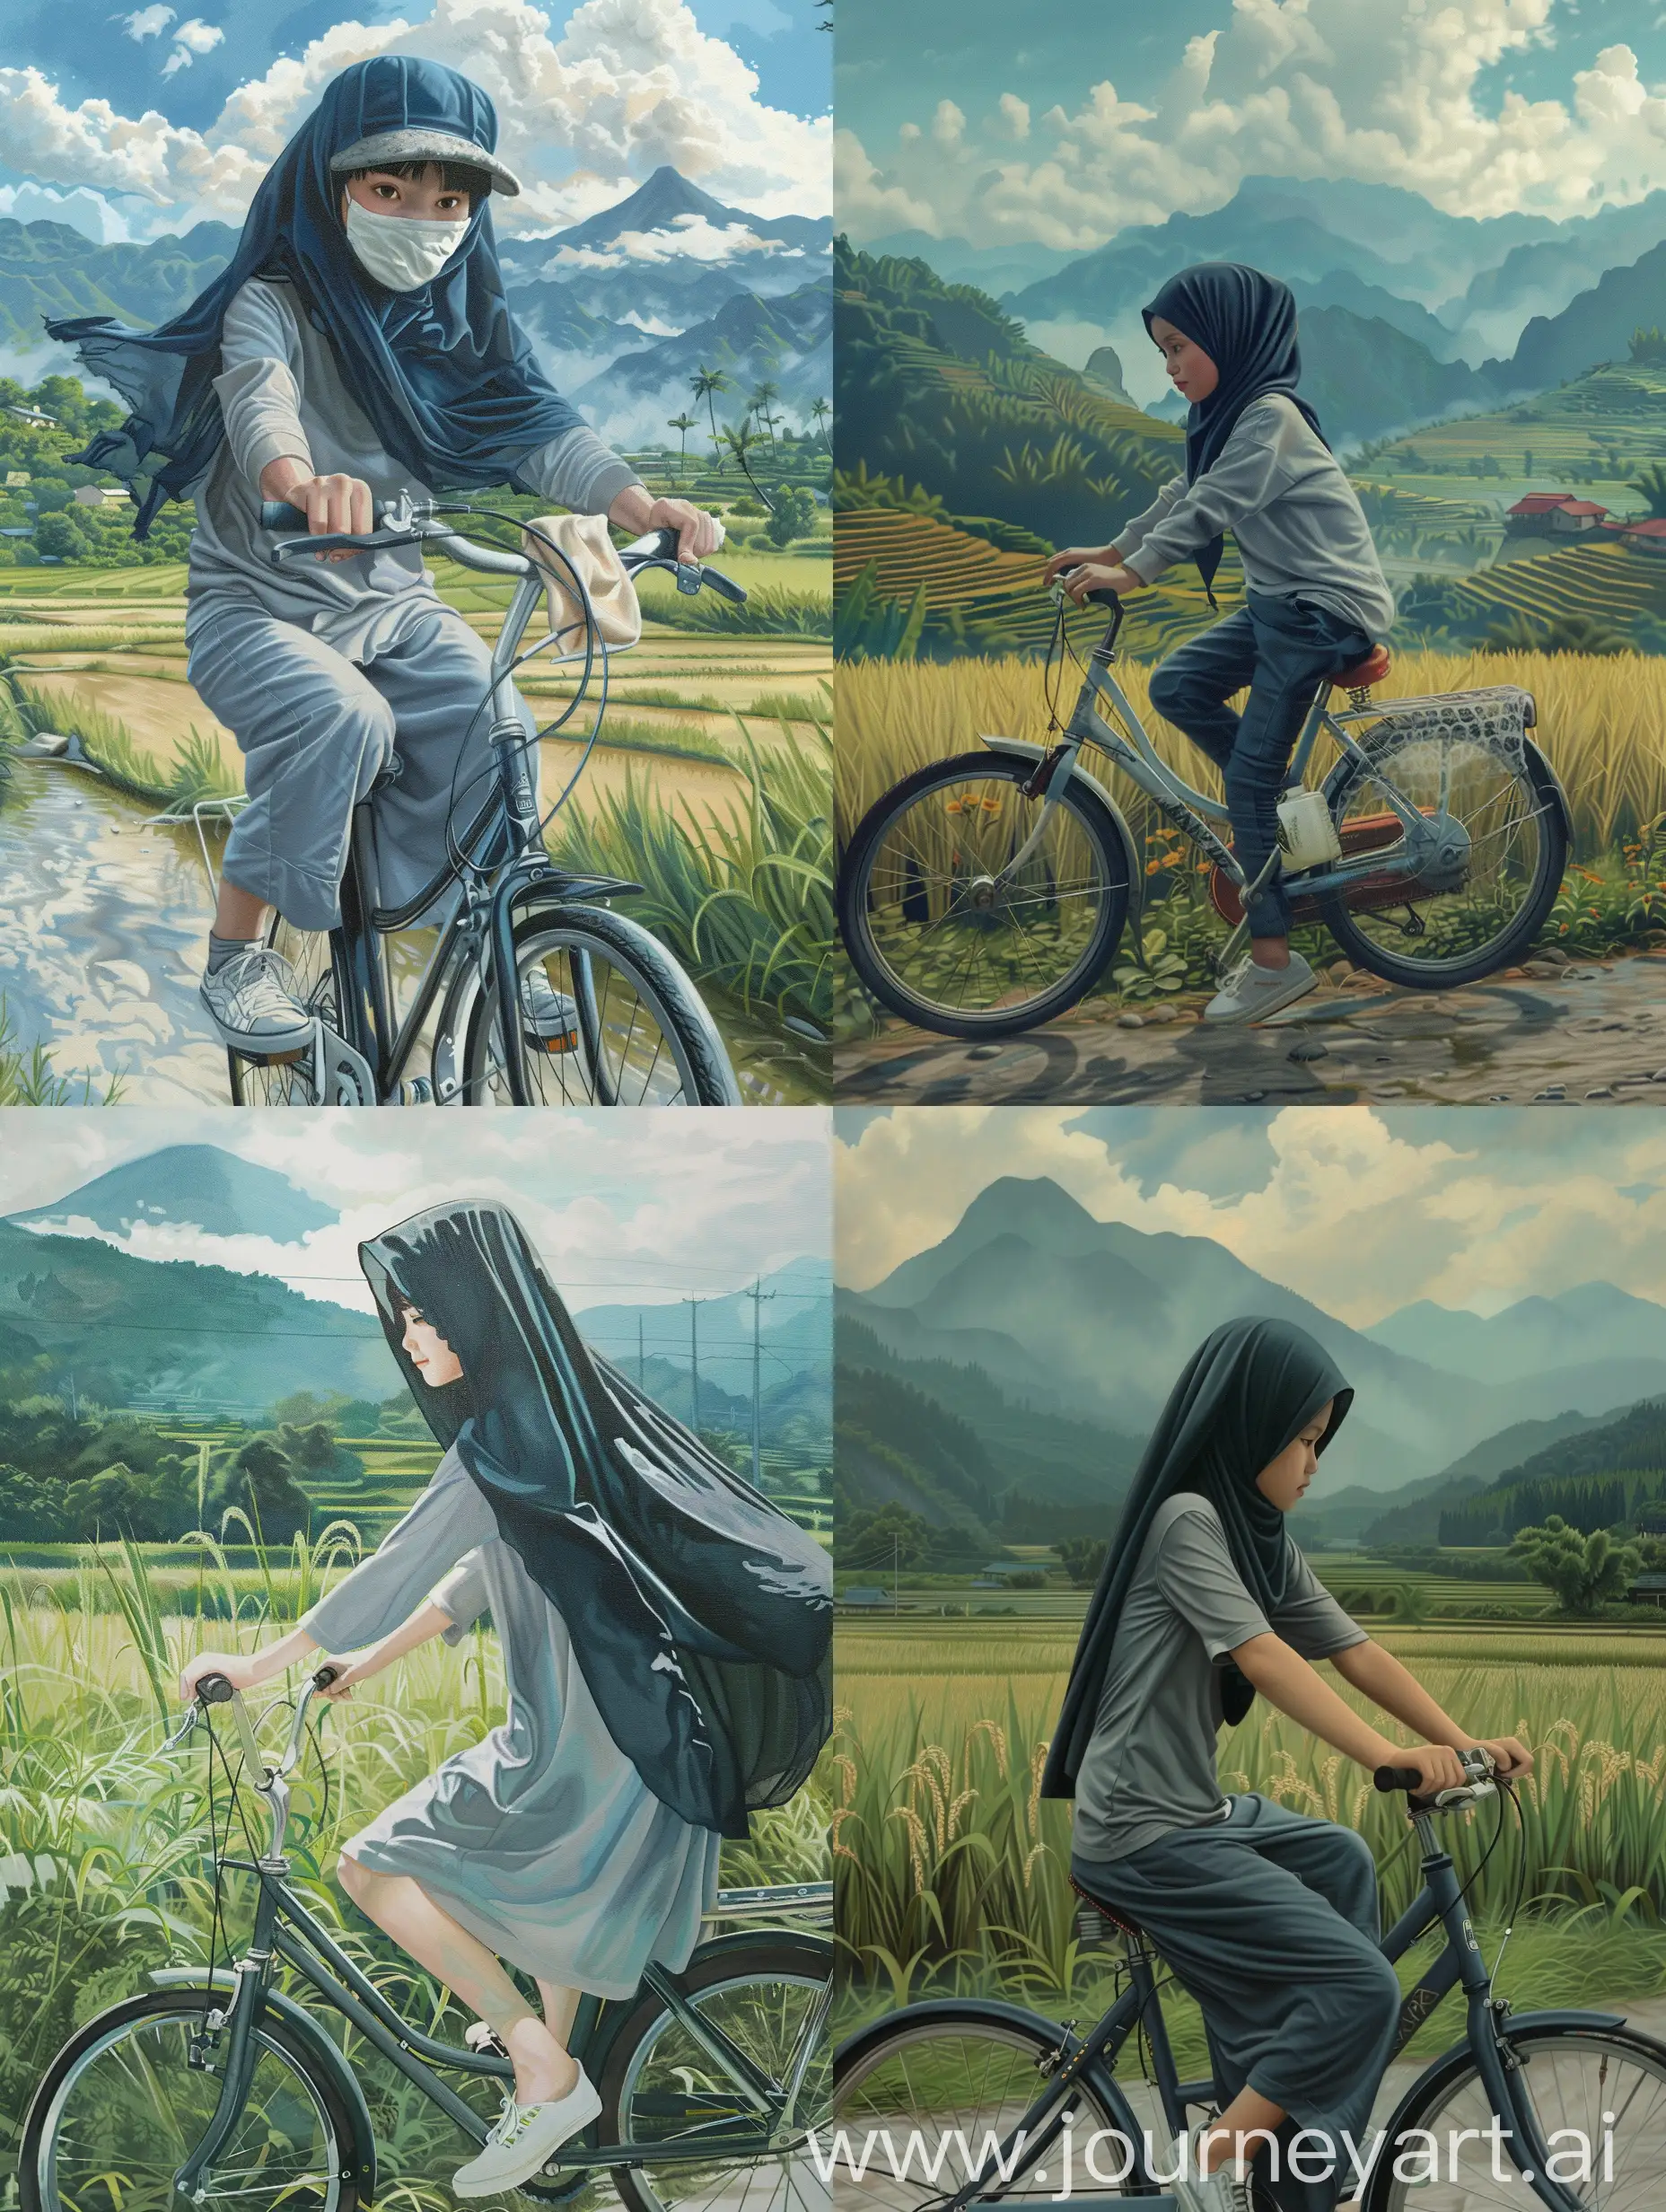 Young-Girl-Cycling-in-Navy-Veil-with-Mountain-and-Rice-Fields-Background